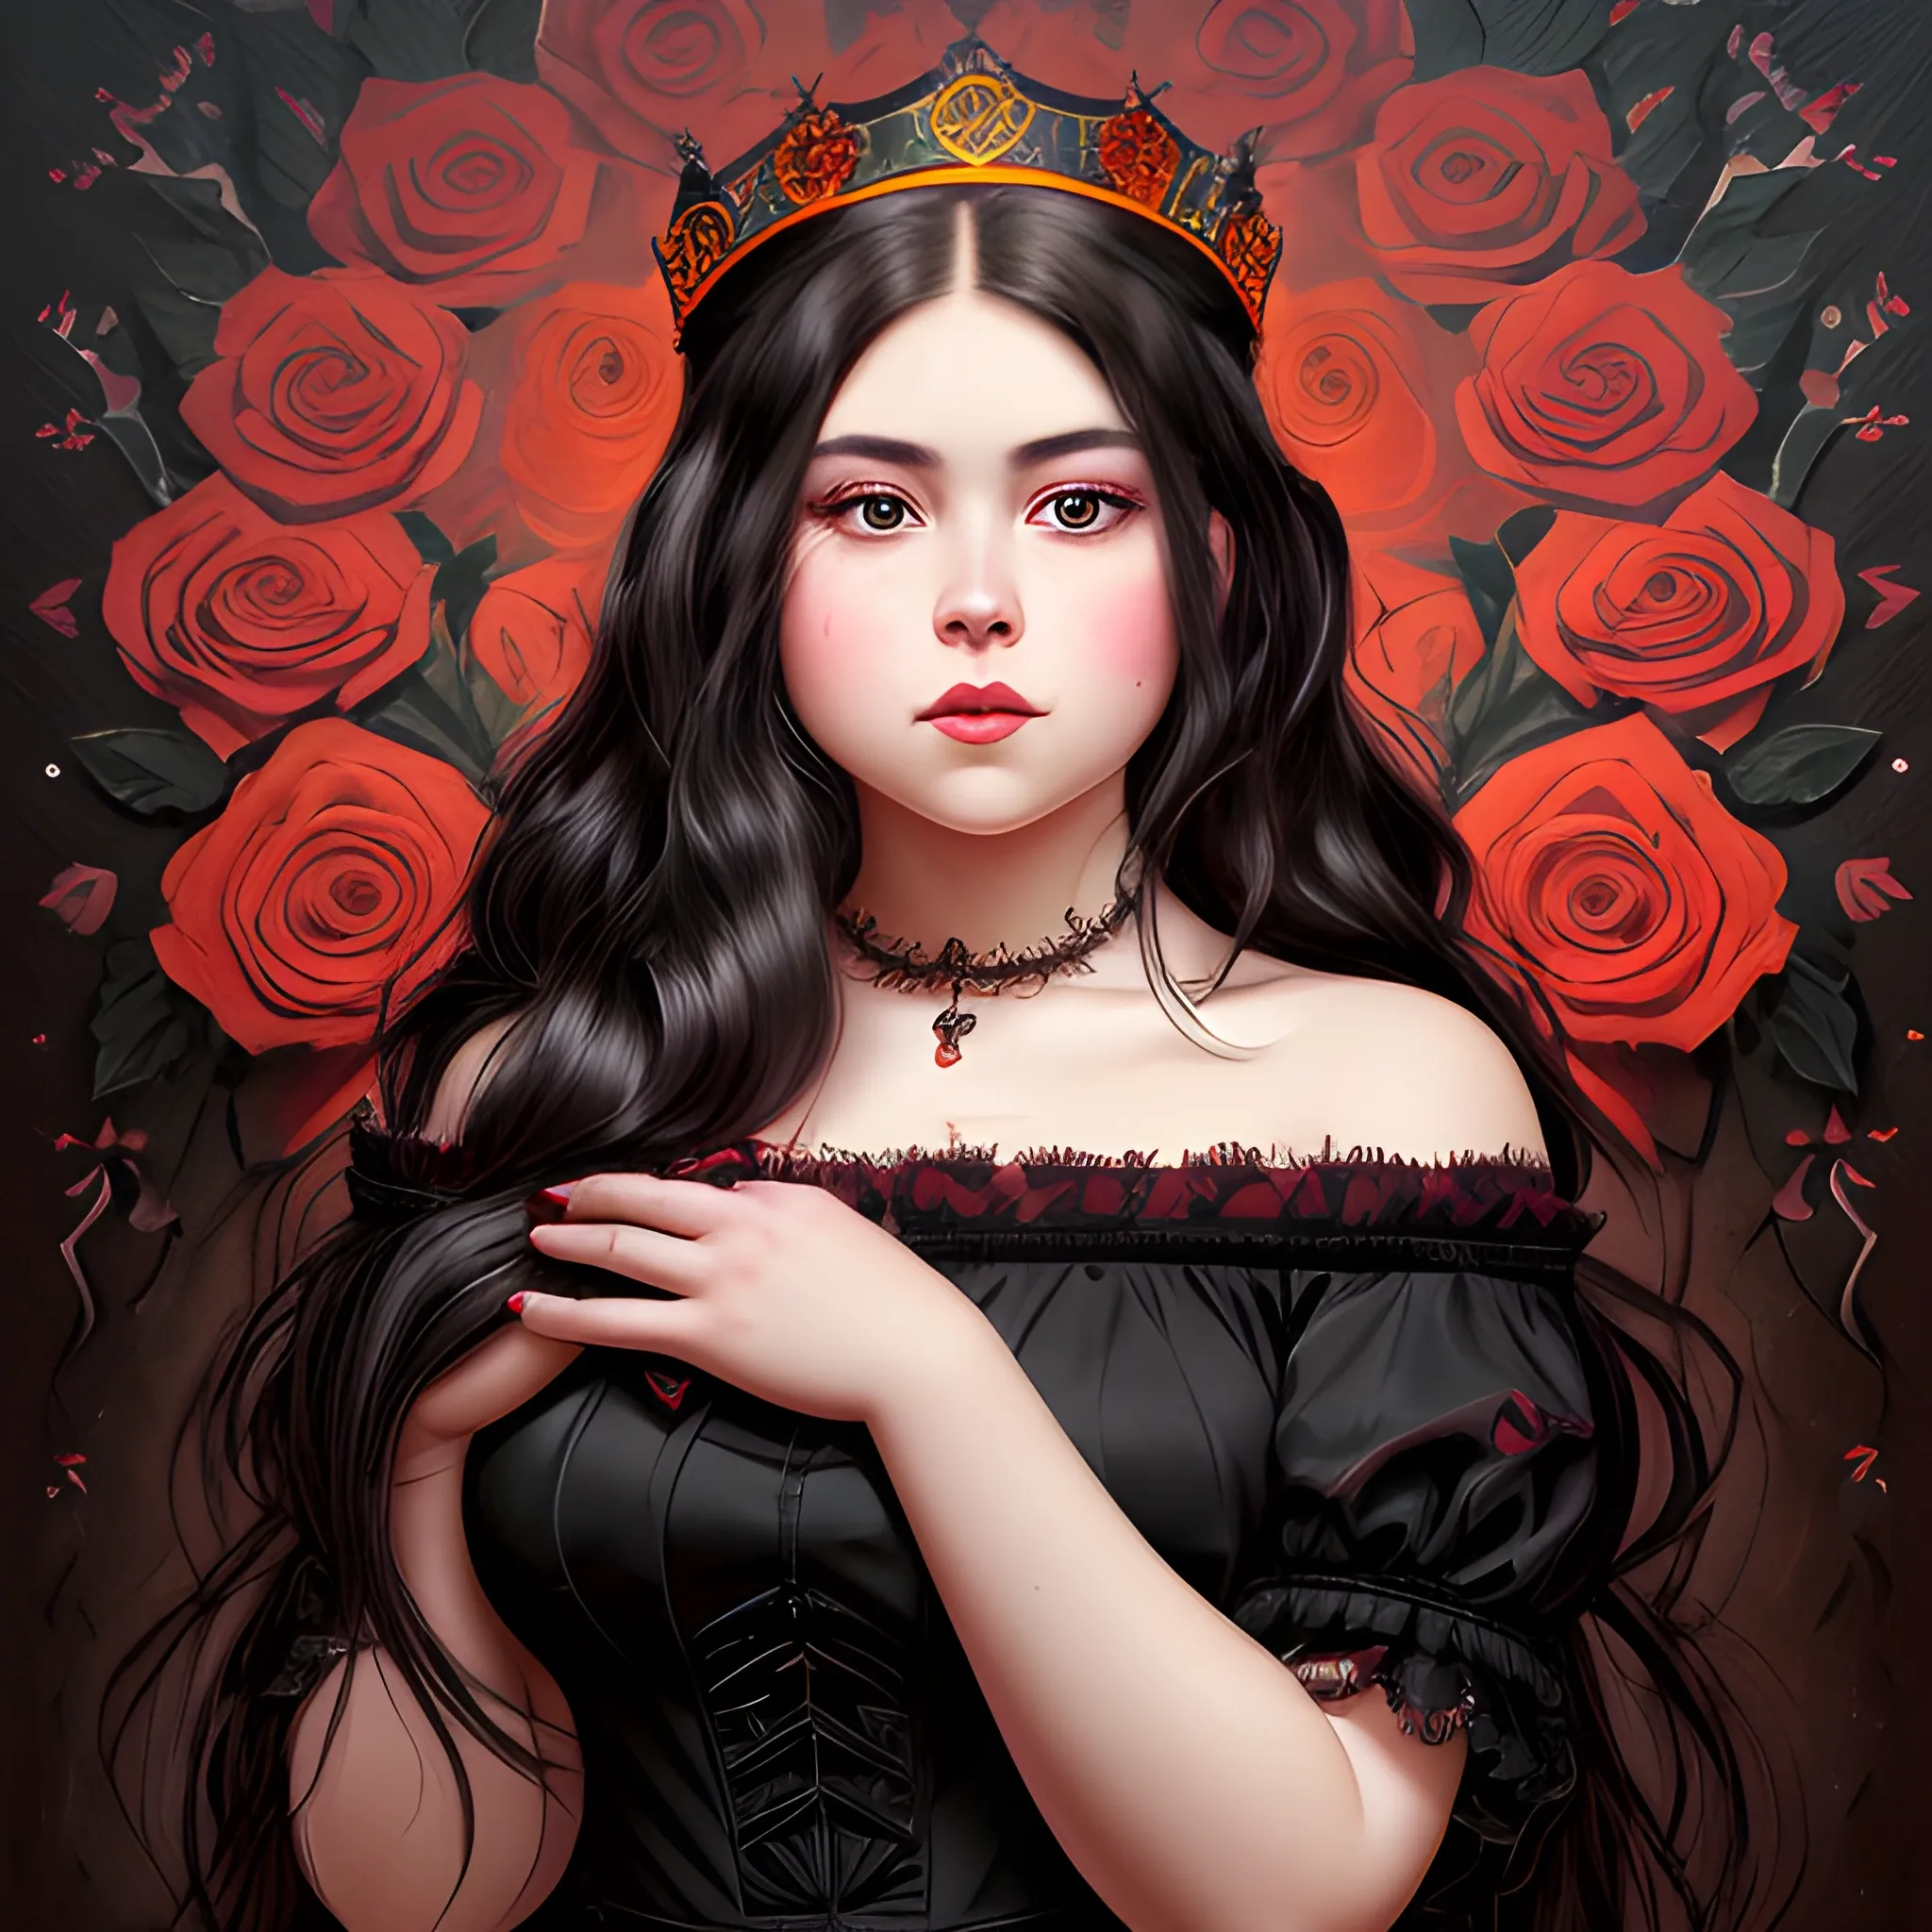 (((high detail))), best quality, Warm Colors, (detailed), (high resolution)Black long-haired female adult, full body, curvy face, with rosy cheeks, big black eyes, thick eyelashes, thick peach lips, thick eyebrows,  with a black and red dress holding a bloody crown in her hand, roses of backround , wallper , Oil Painting,  